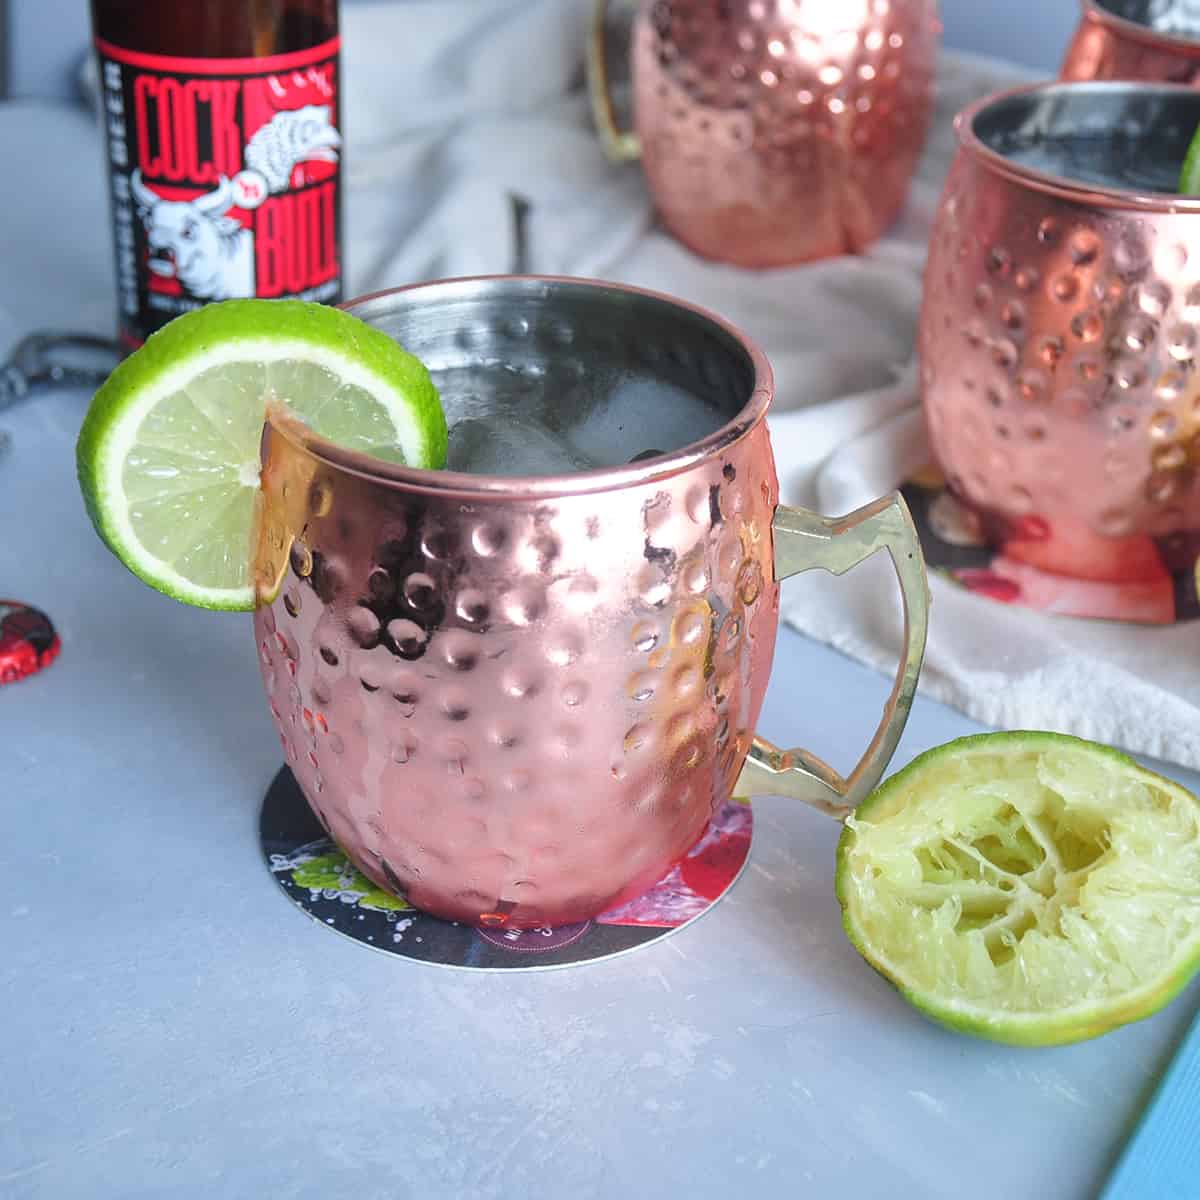 Moscow Mule recipe and second shot of an excellent cocktail.